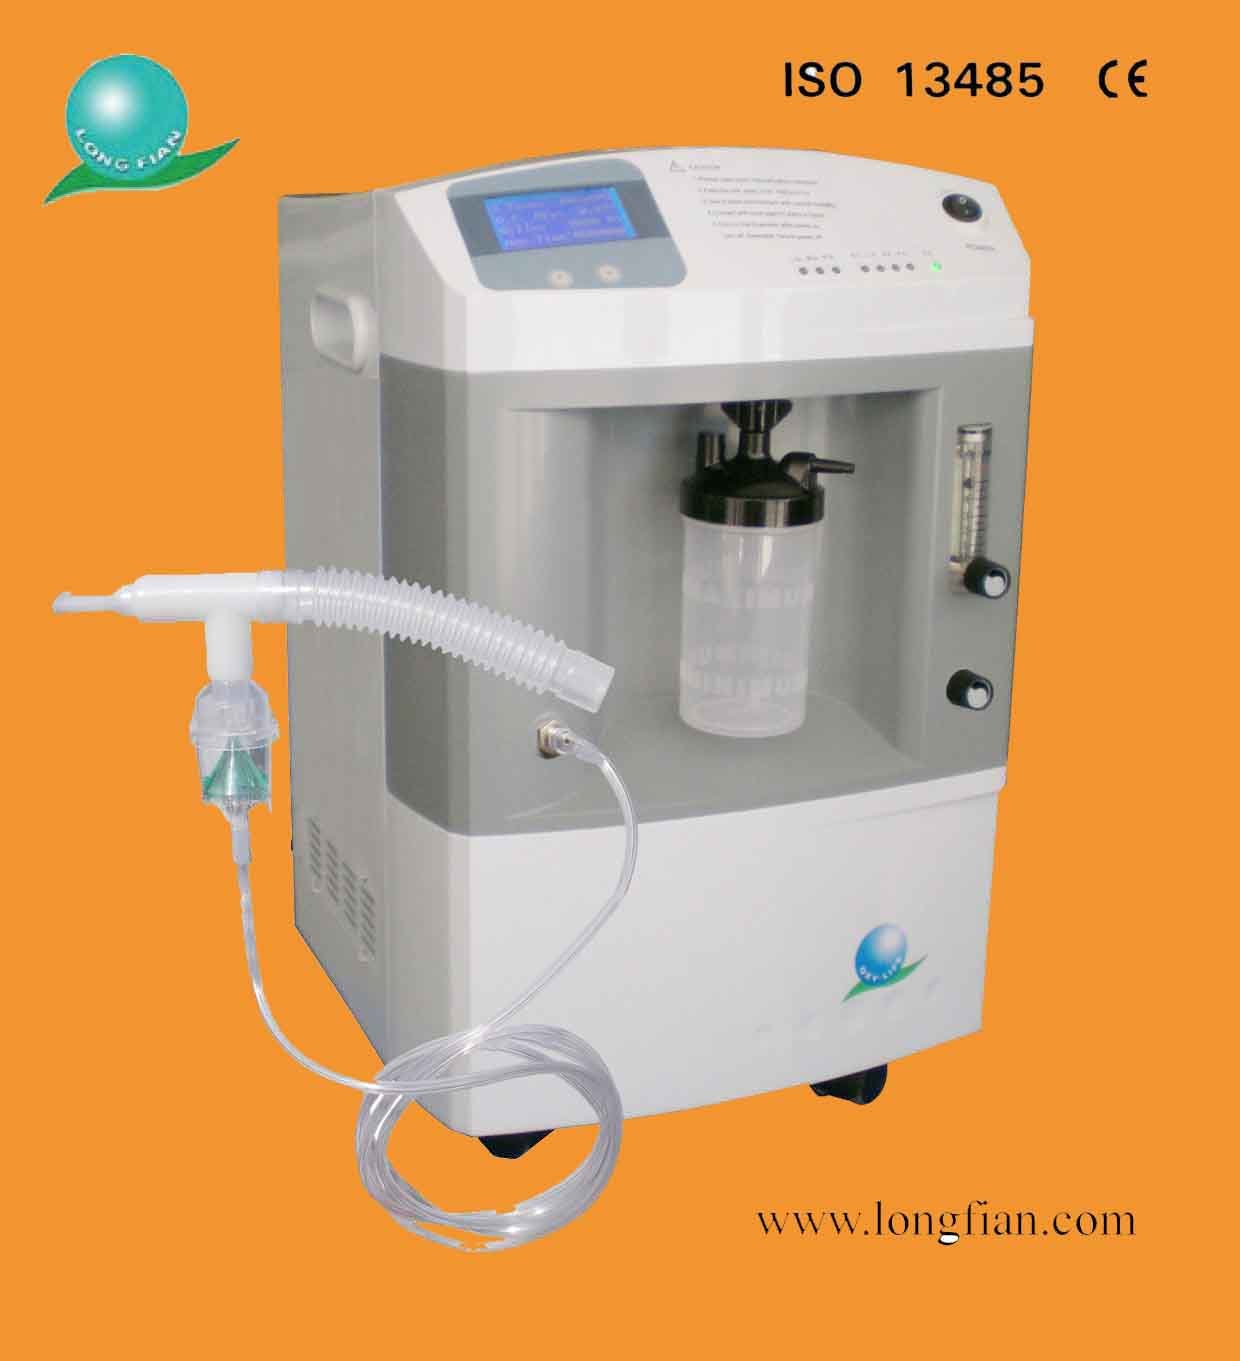 Home Care Oxygen Concentrator Jay-10 /Longfian Brand